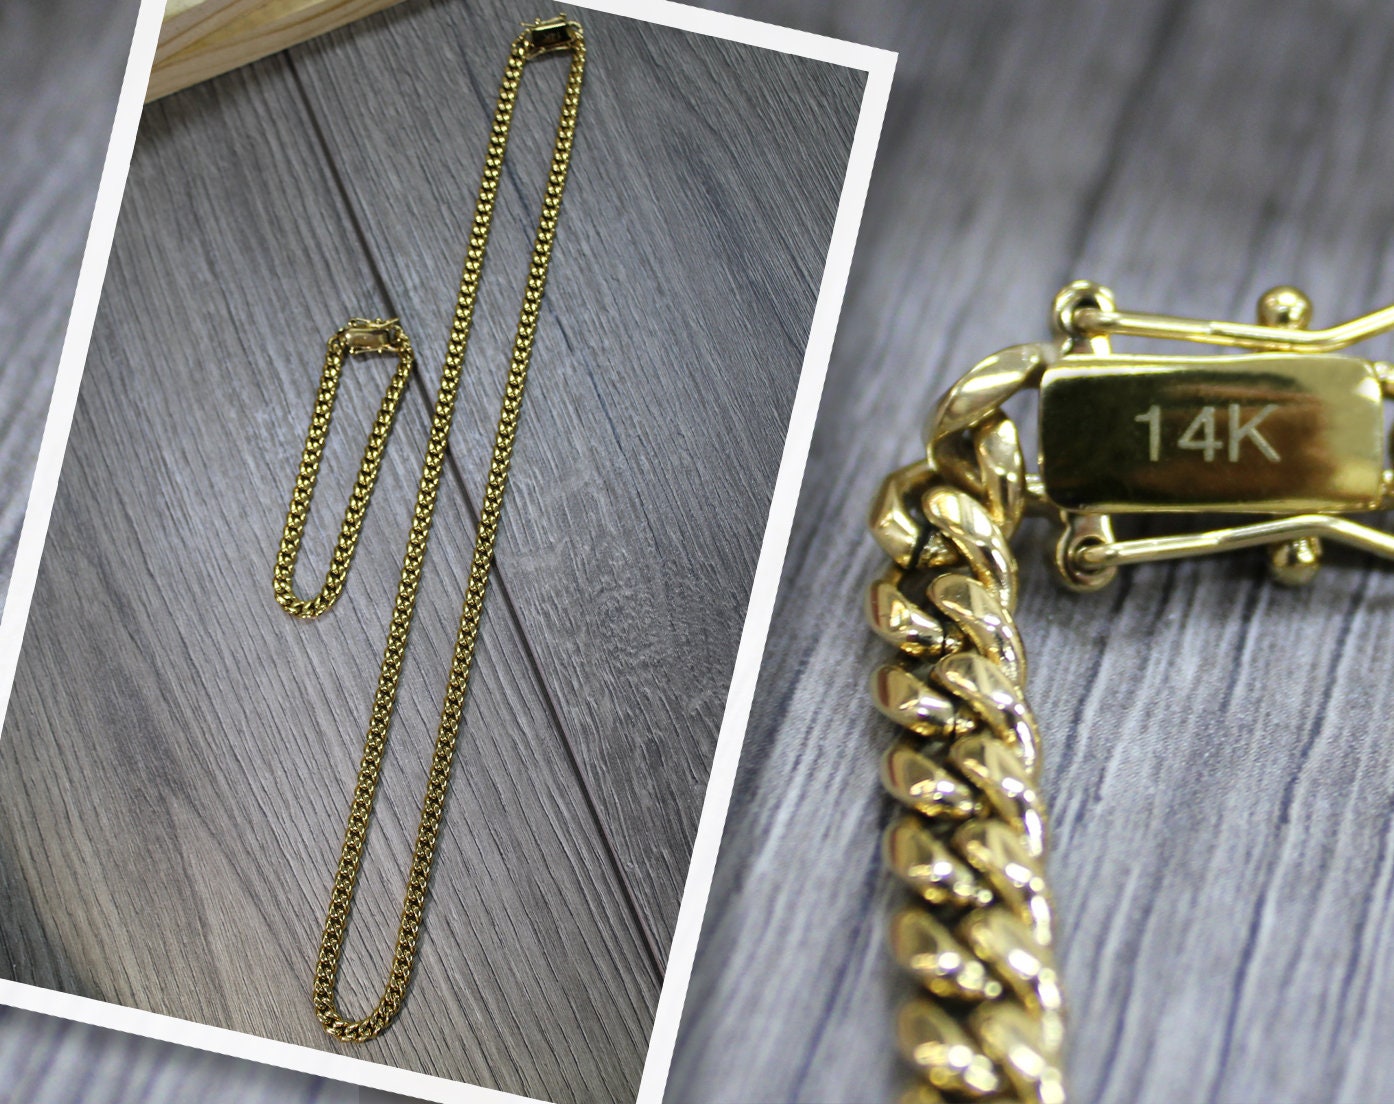 14k Gold Filled Miami Cuban Link Bracelets or Anklet 6mm Thickness, Curb Link, For Wholesale and Jewelry Supplies